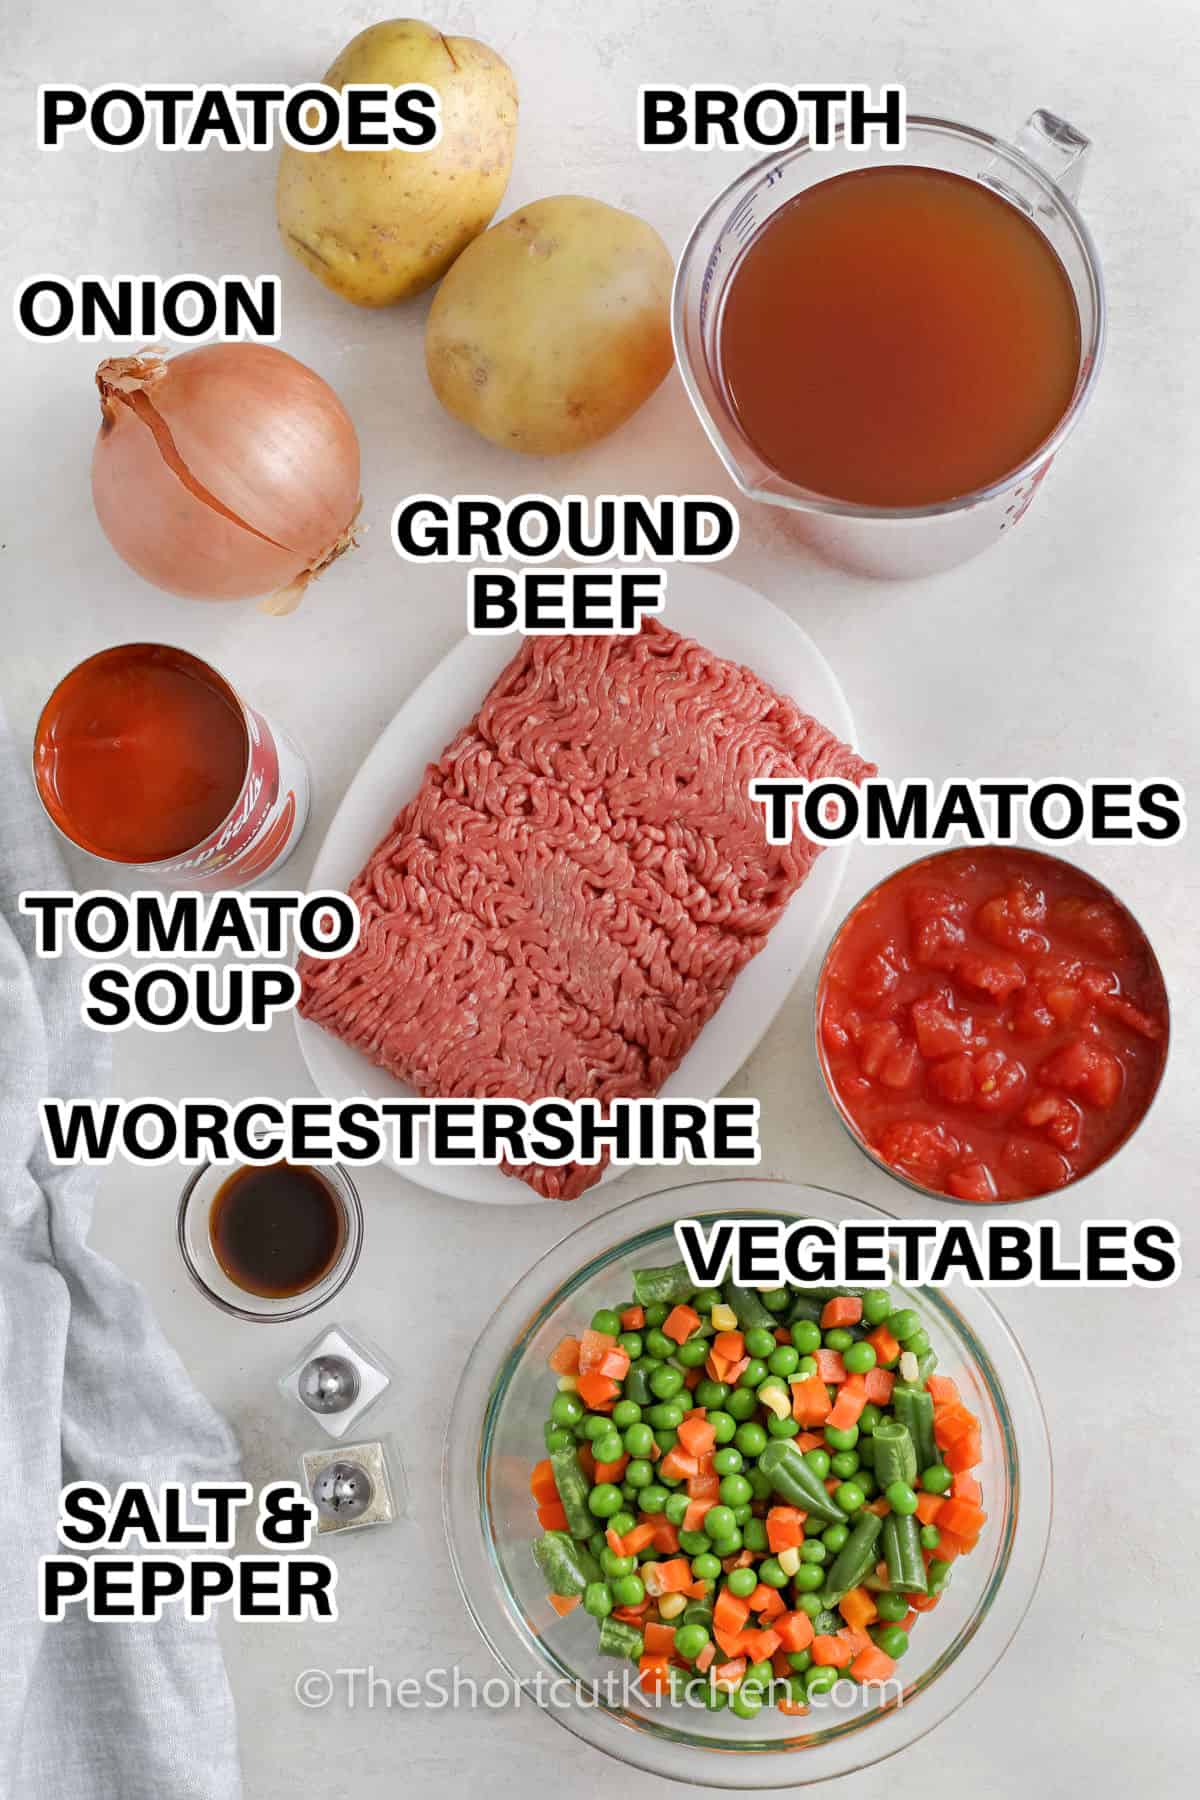 potatoes, broth, ground beef, onion, tomato soup, tomatoes, Worcestershire sauce, vegetables, salt and pepper with labels to make ground beef soup